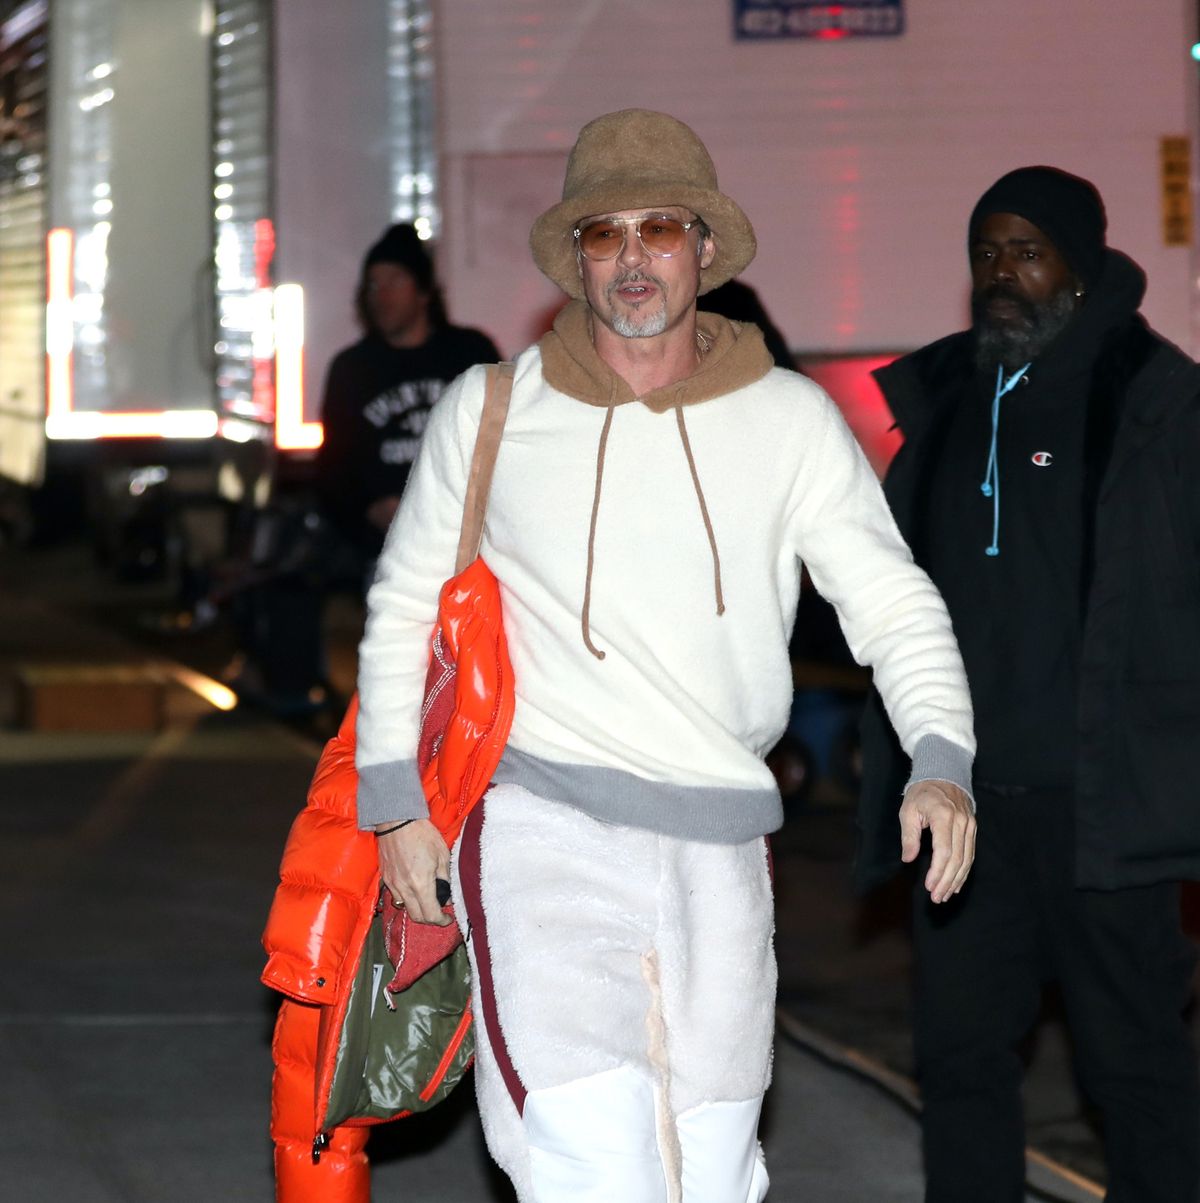 Brad Pitt Stepped Out in a Giant Fuzzy Bucket Hat: Pics